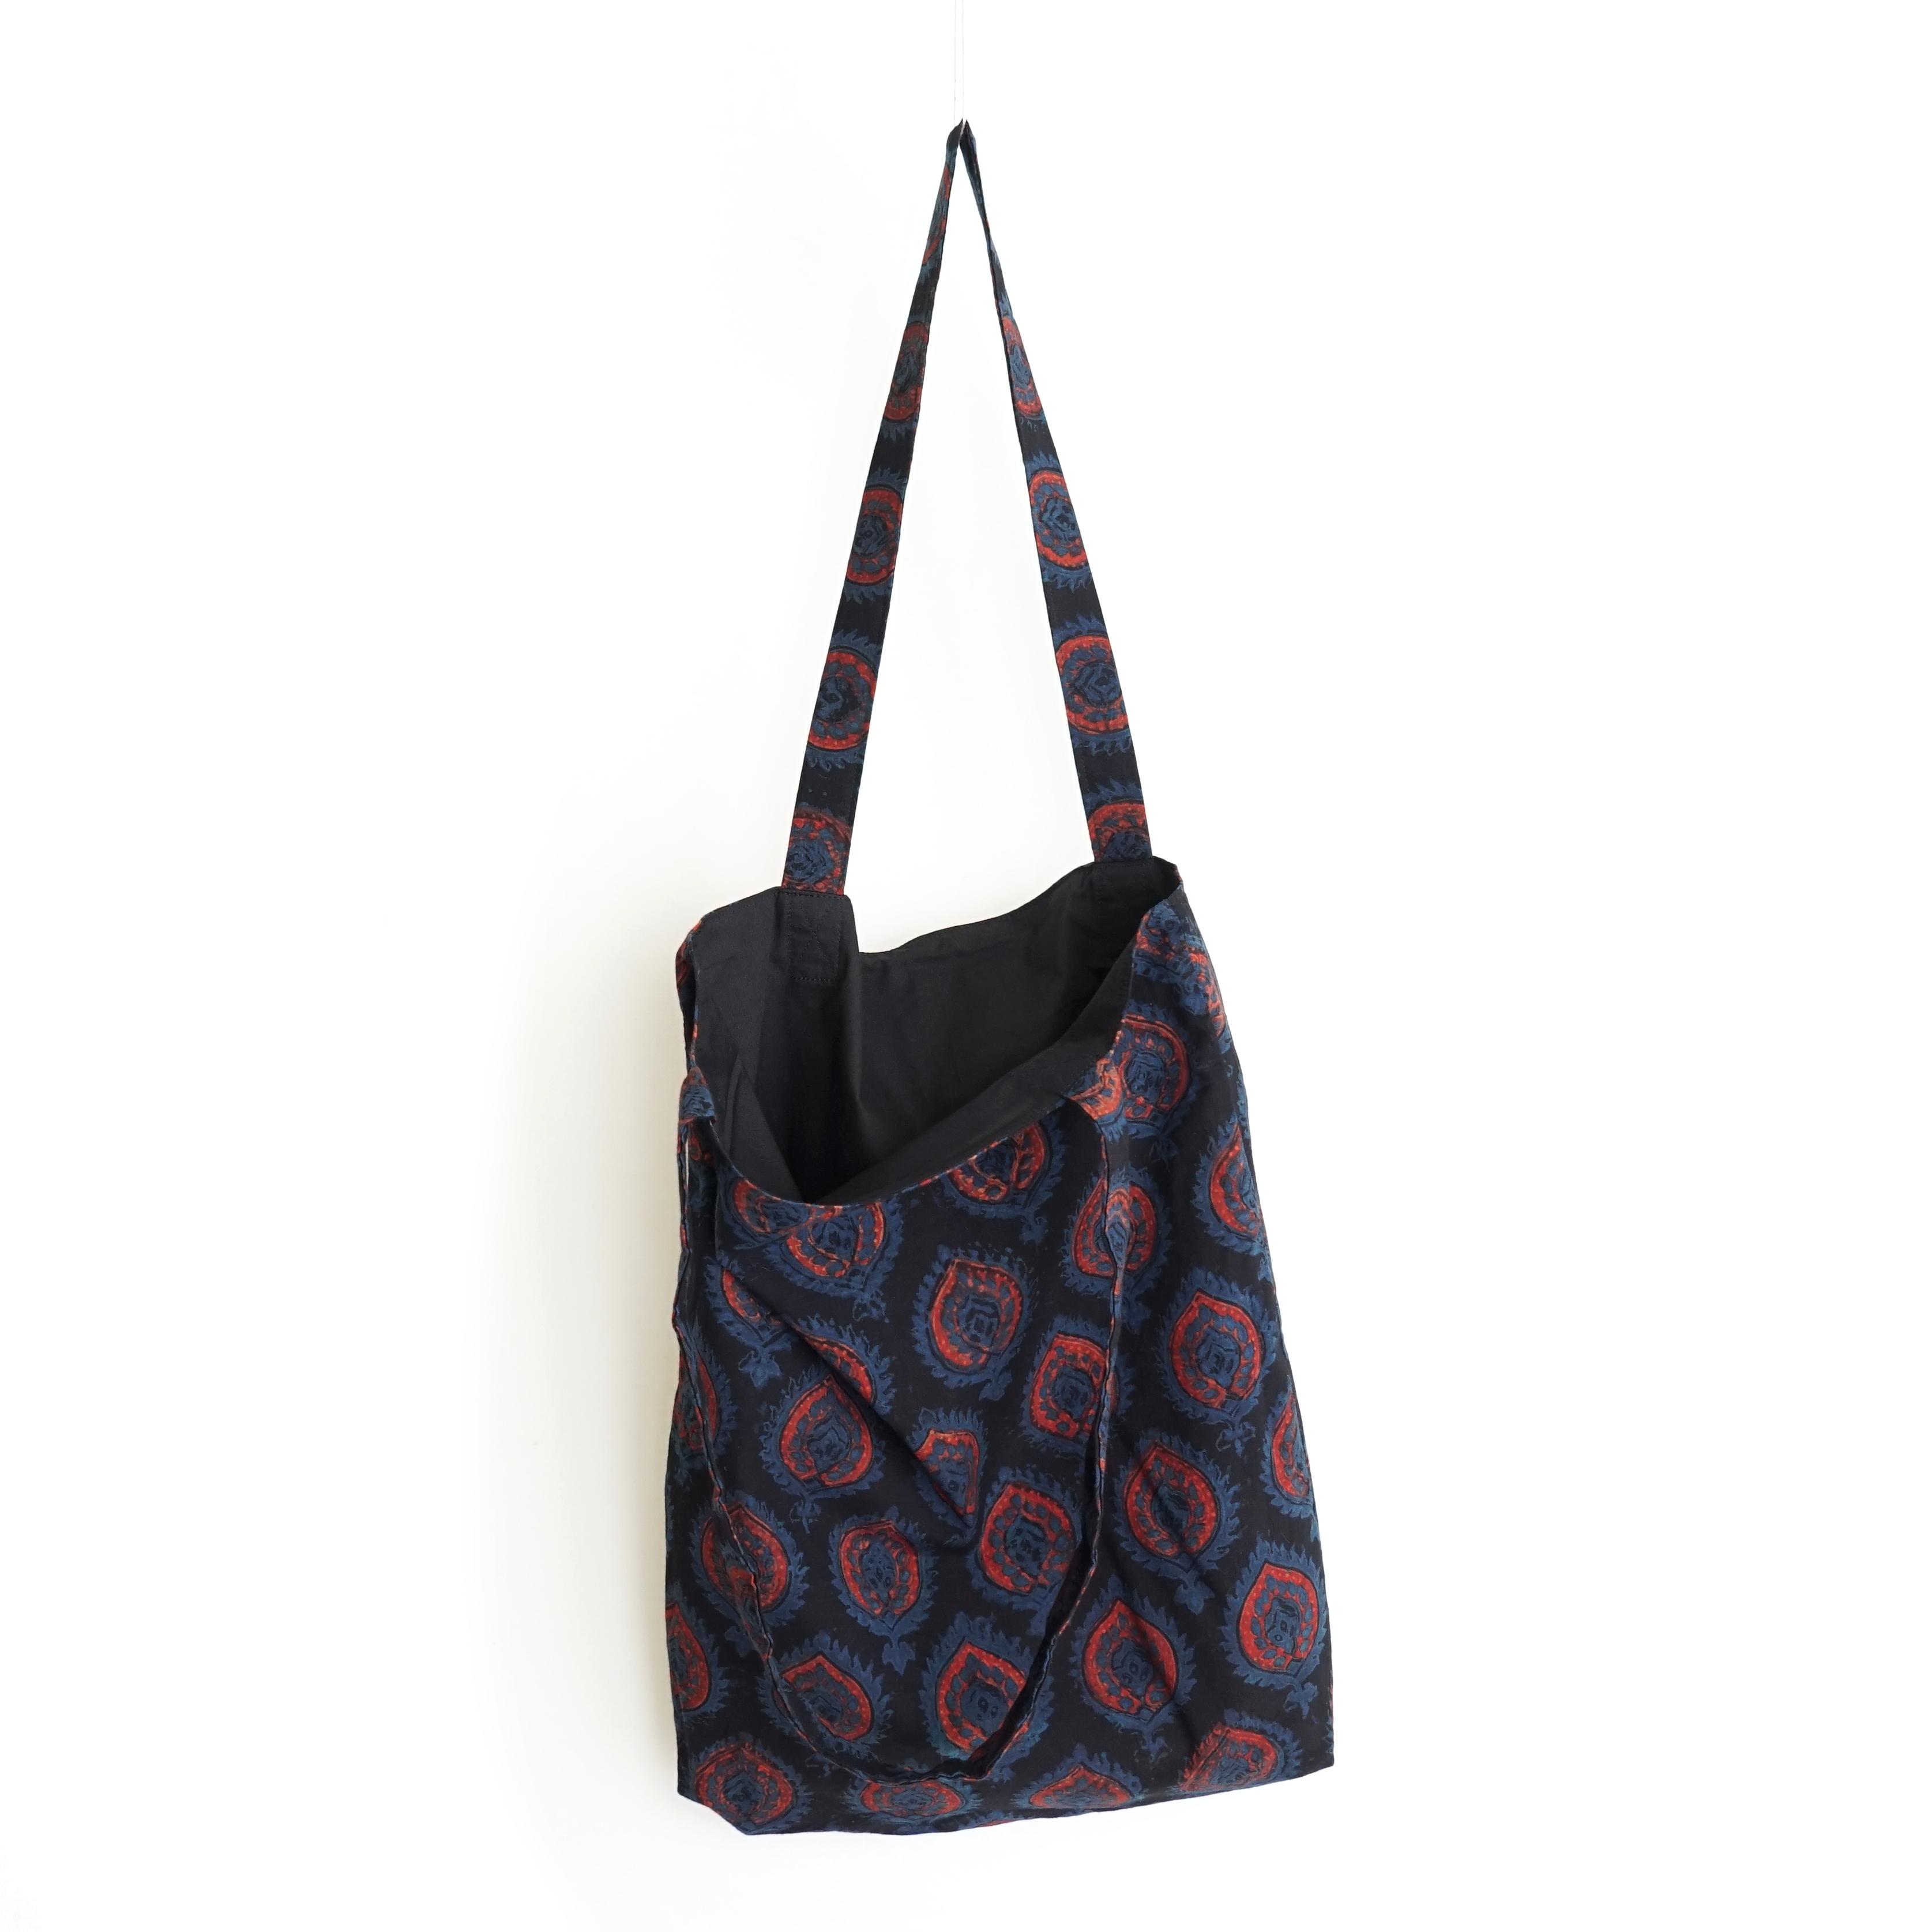 block printed cotton tote bag, natural dye, black, blue red crest design, lined with black cotton, open